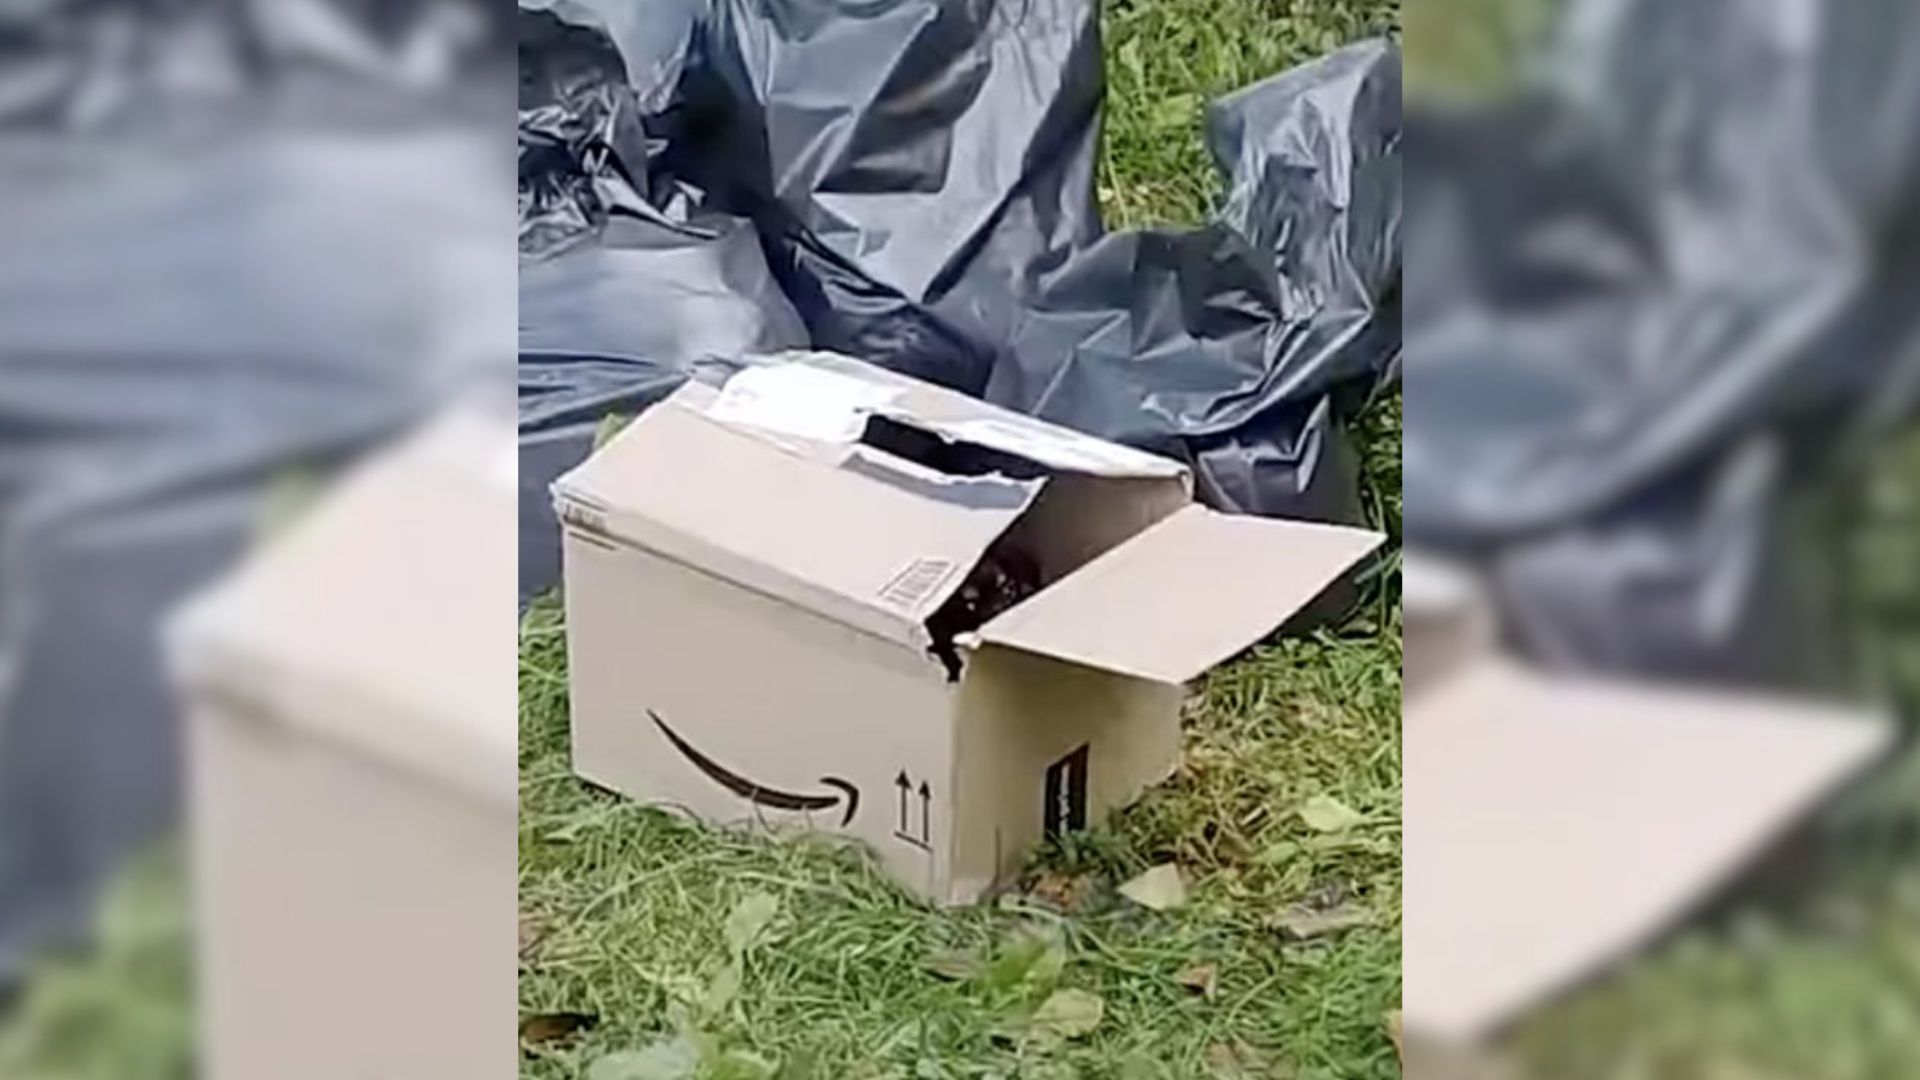 When This Man Saw The Cute Head Peeking Out Of The Box, He Immediately Knew What To Do